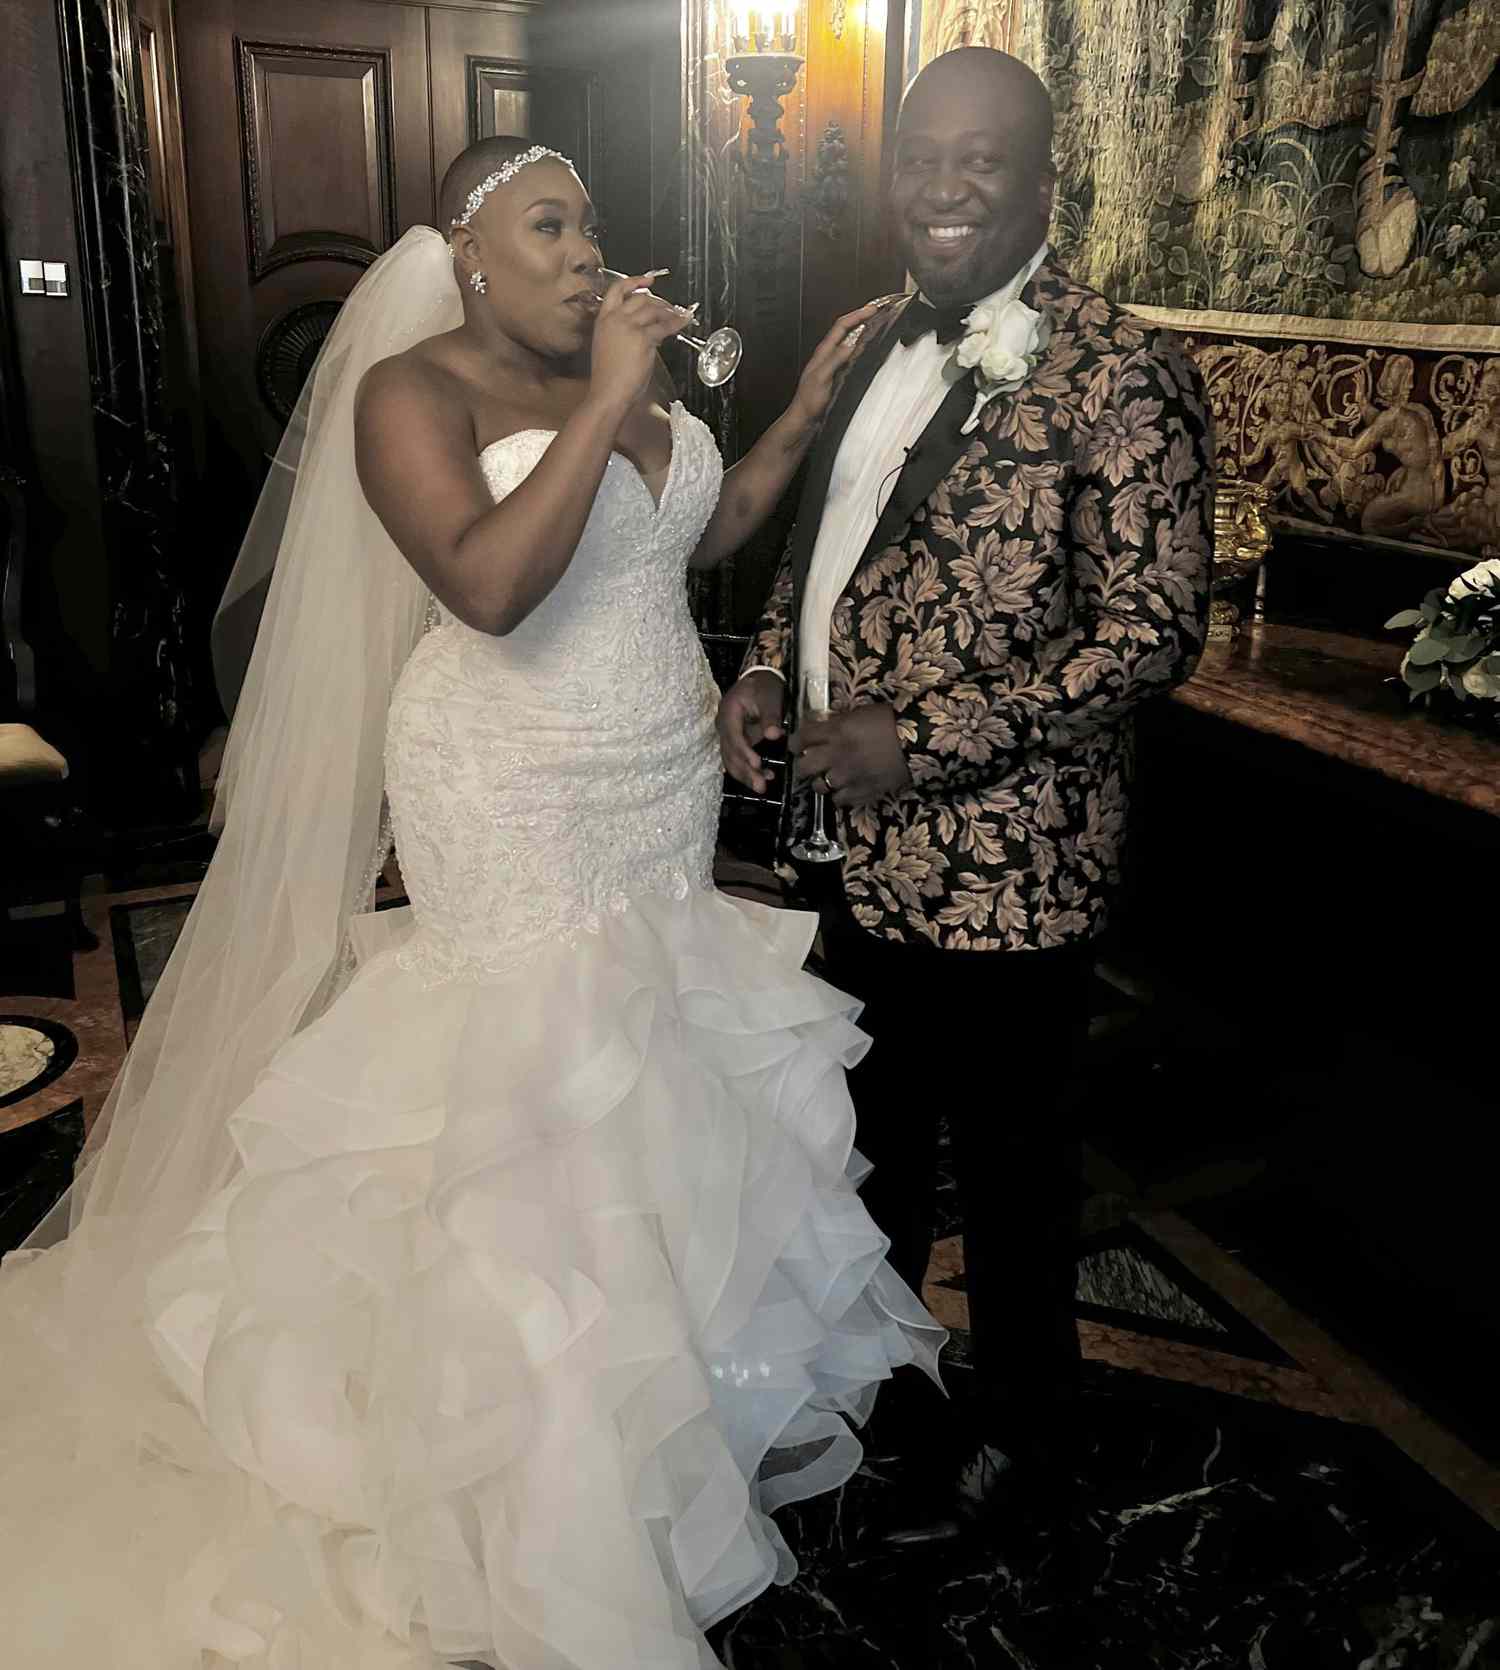 Symone Sanders Is Married! TV Host Weds Shawn Townsend in Surprise Ceremony